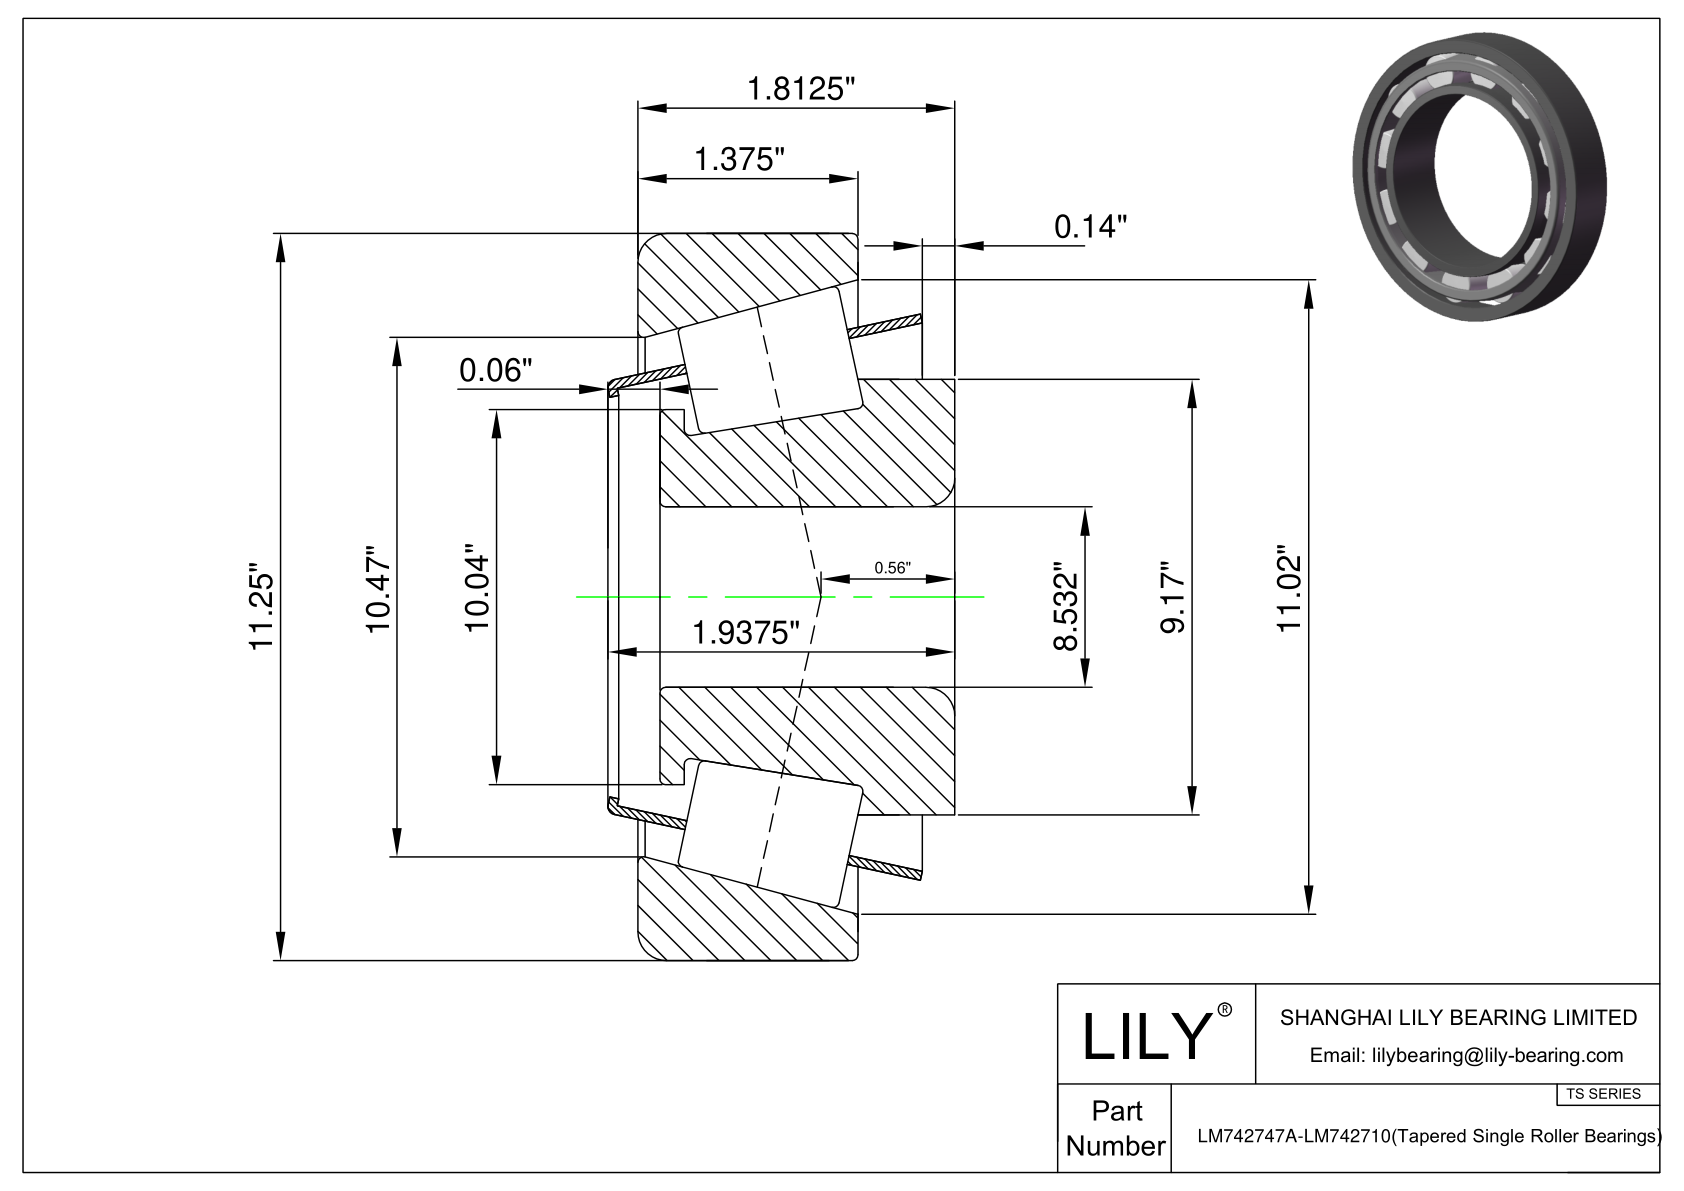 LM742747A-LM742710 TS (Tapered Single Roller Bearings) (Imperial) cad drawing